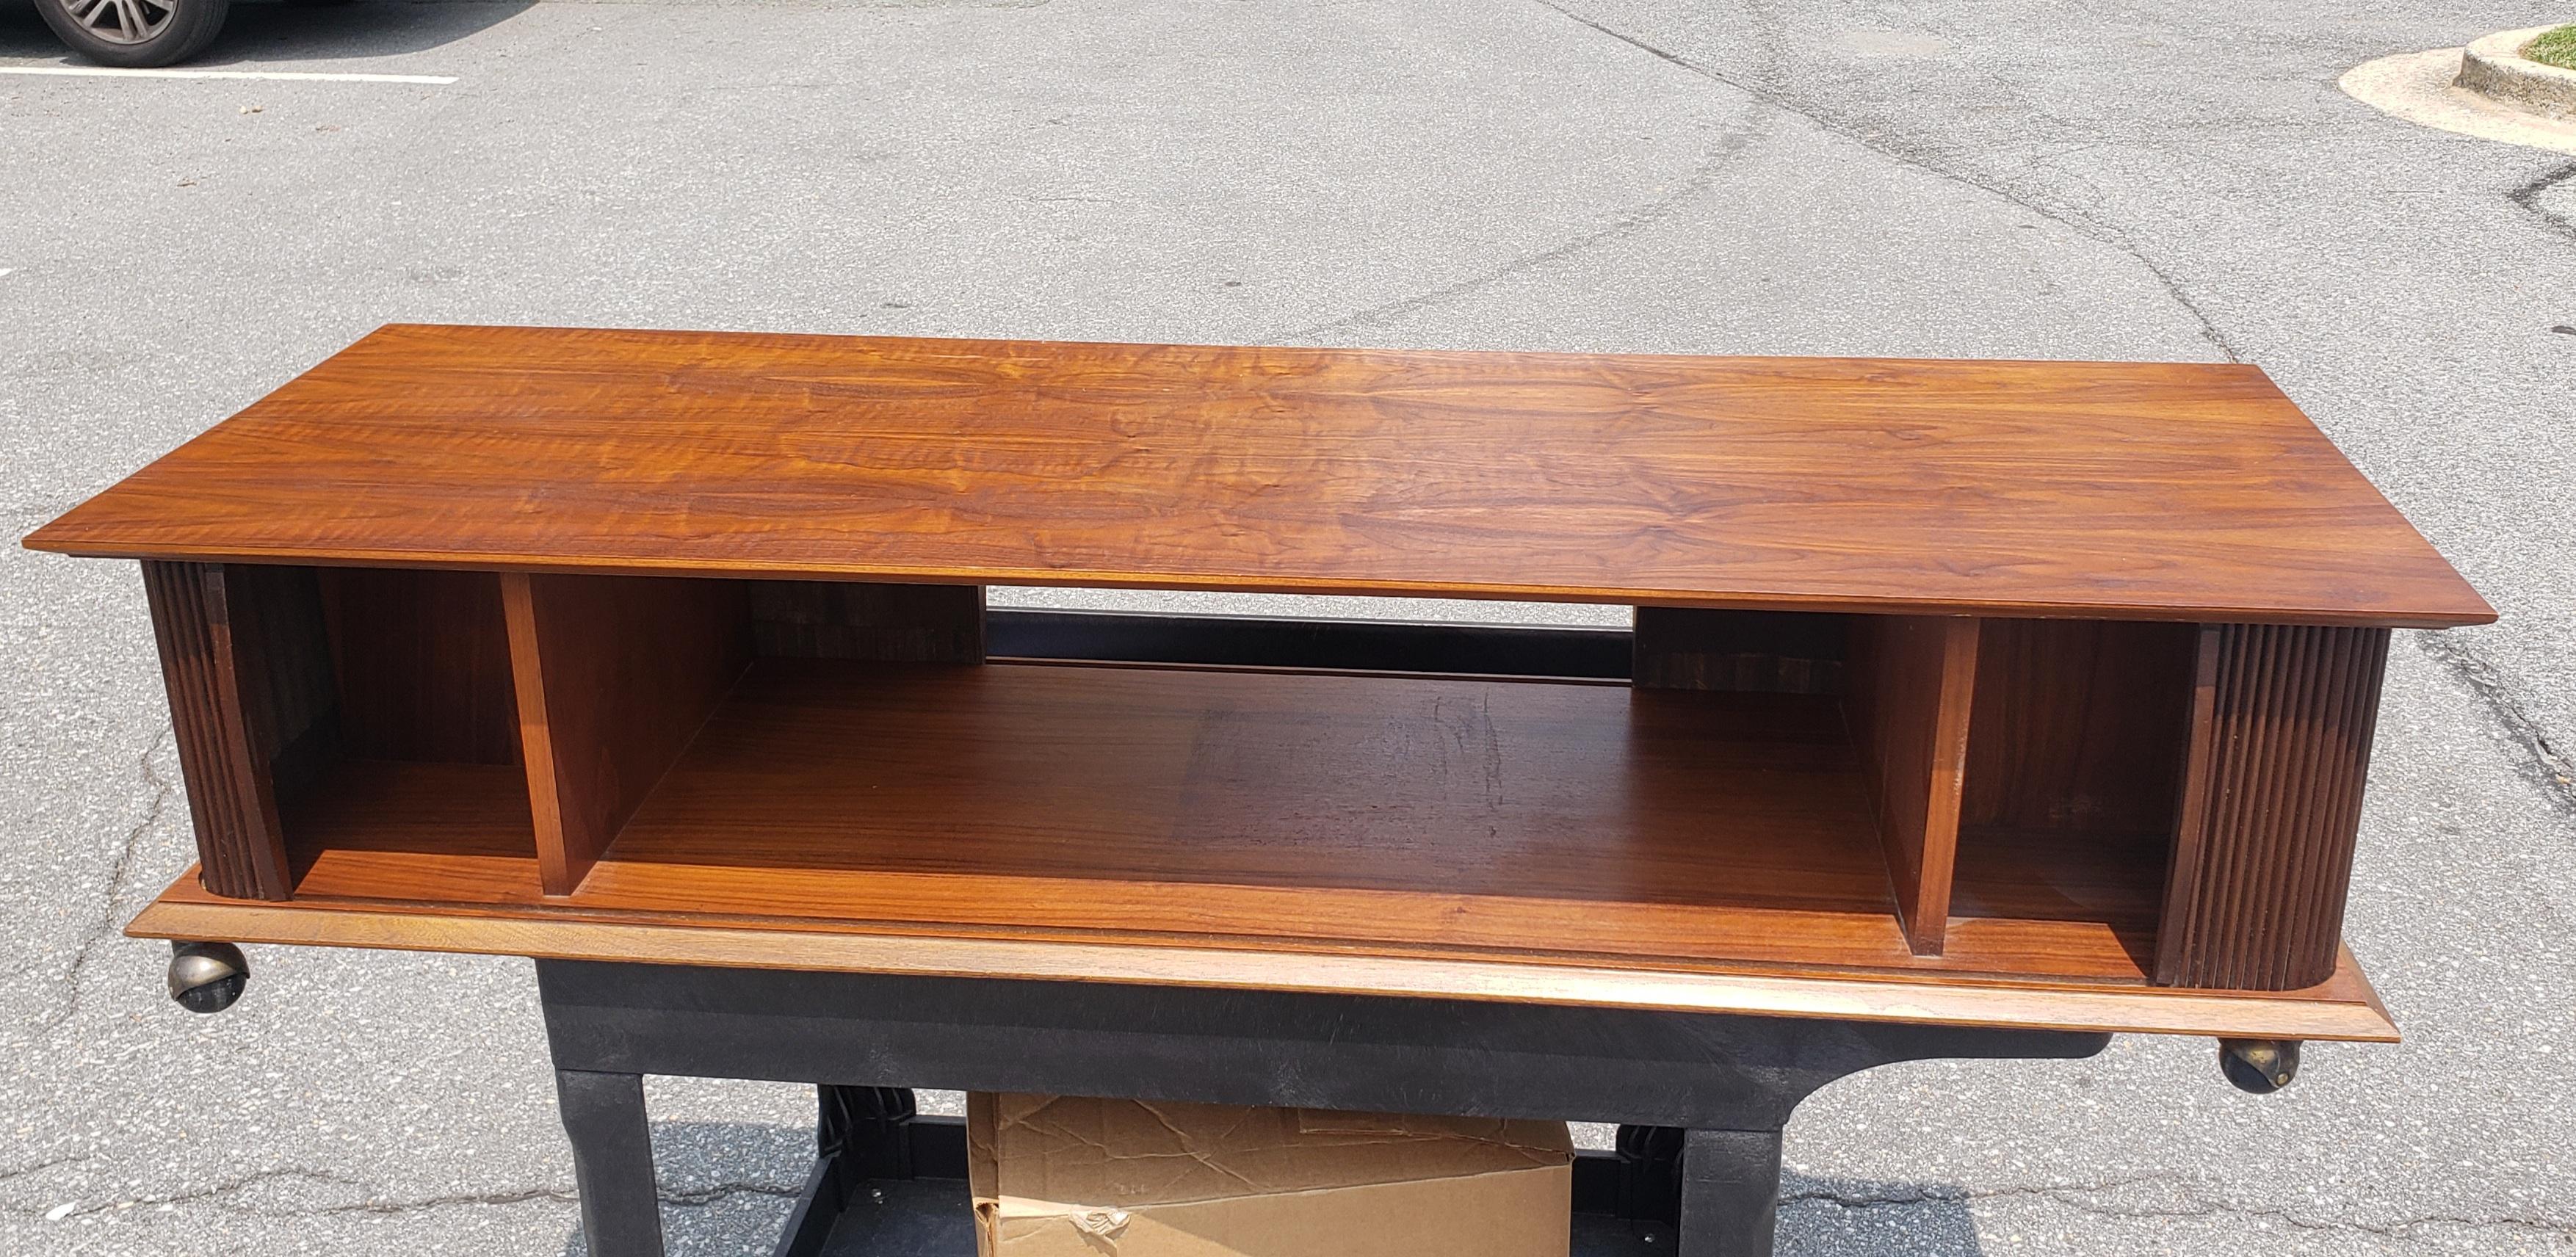 American Lane Mid-Century Modern Style Teak And Tambour Door Base Rolling Coffee Table For Sale